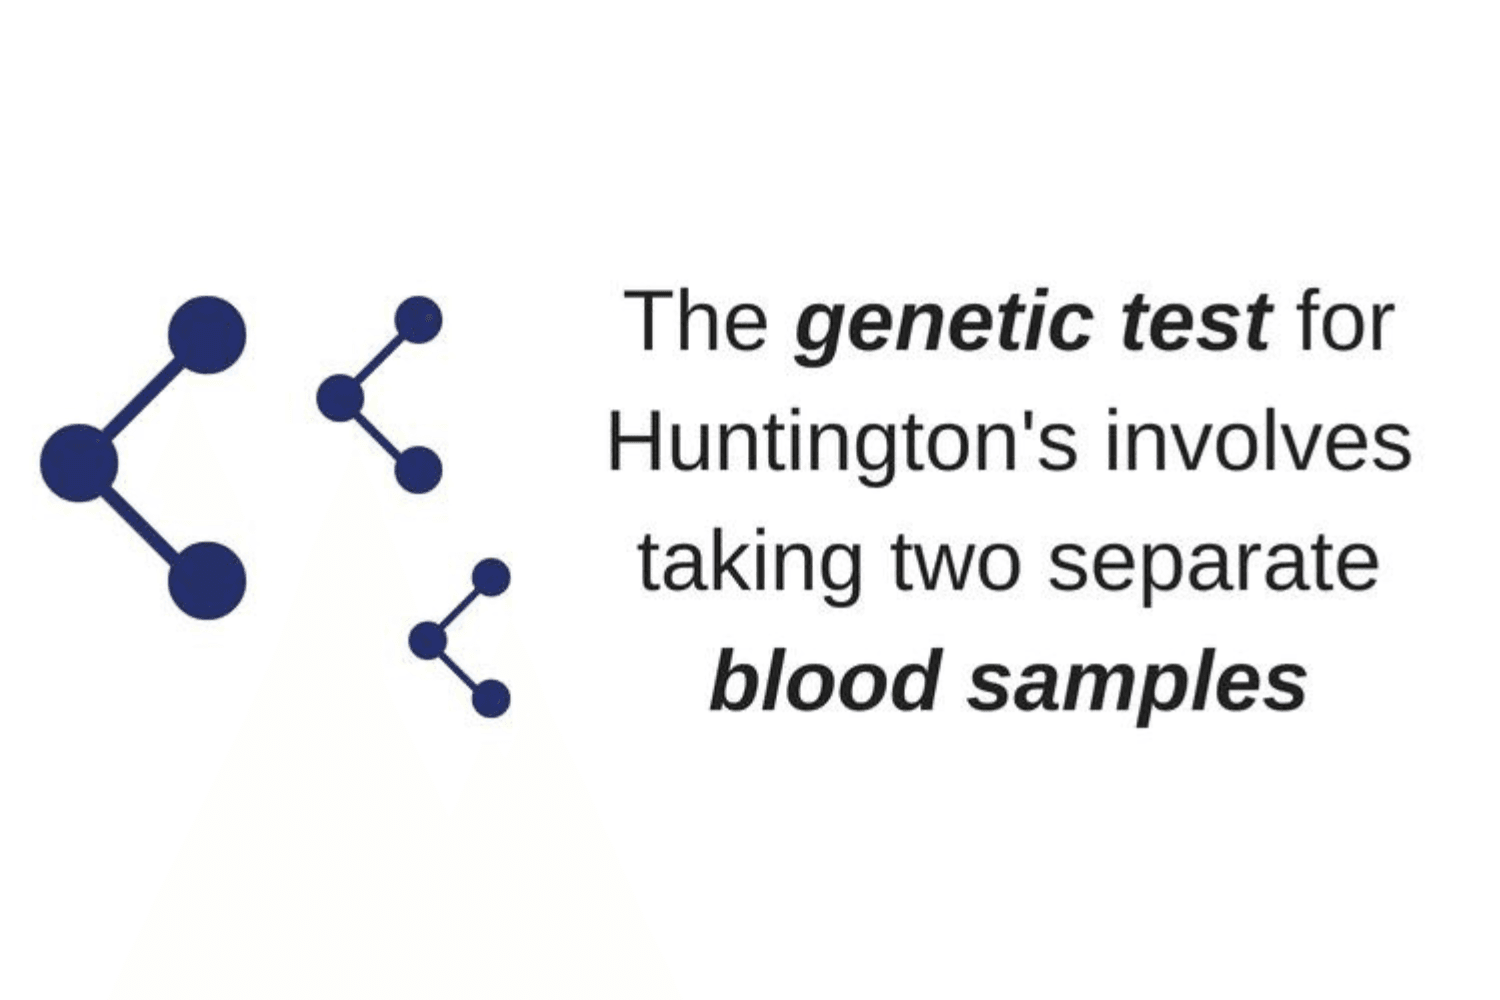 Text post about Huntingtons test process